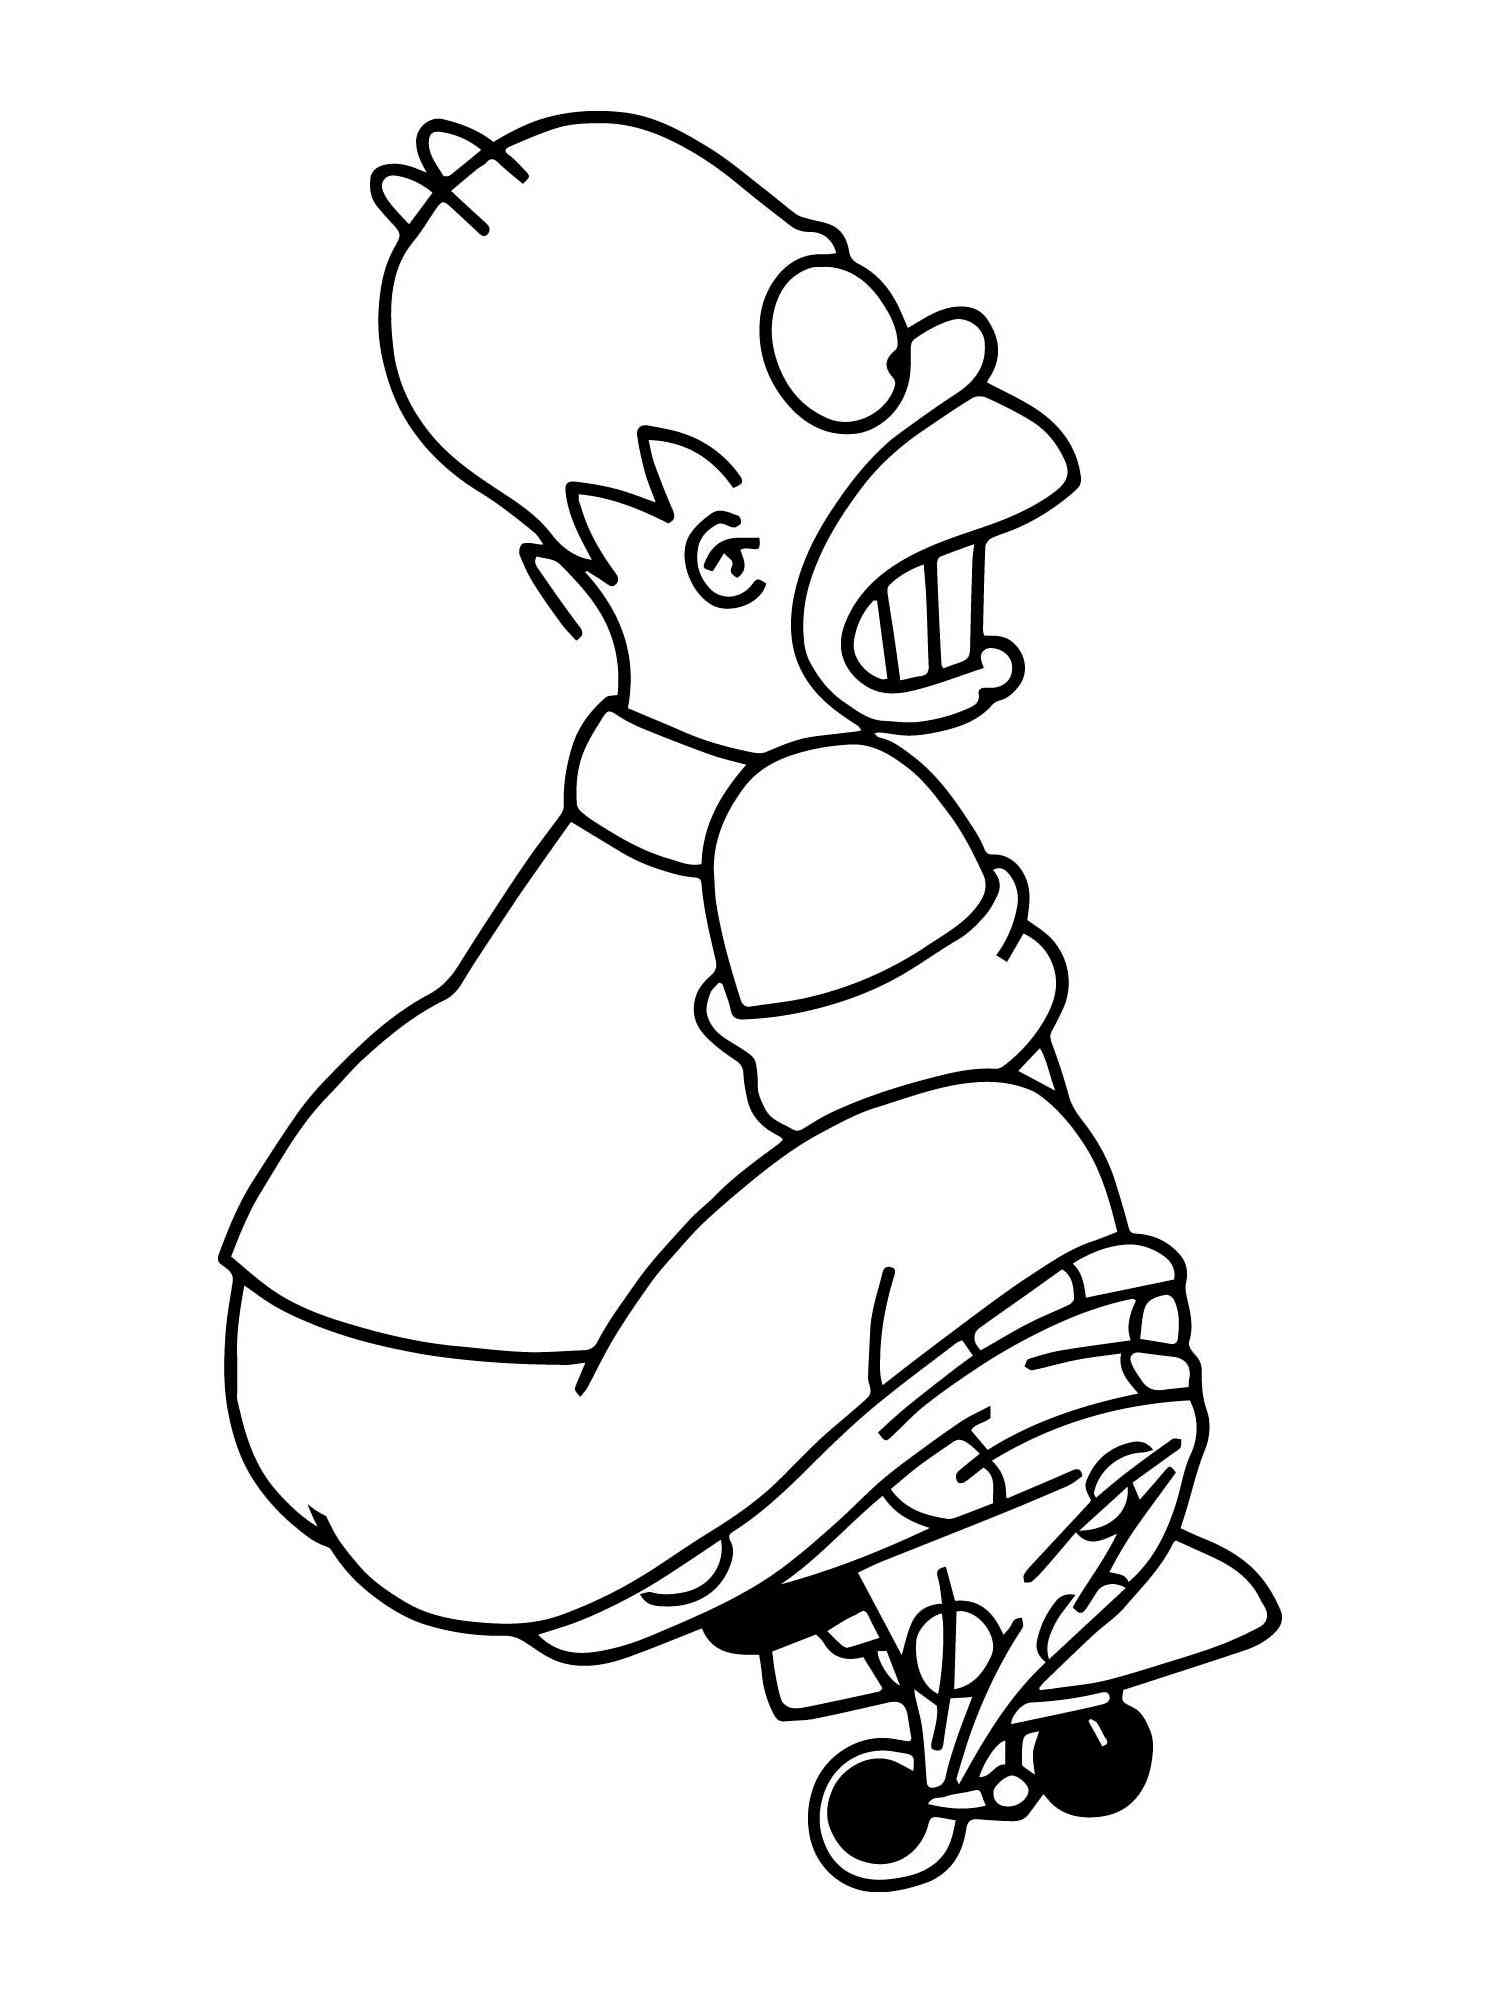 Homer Simpson 7 coloring page